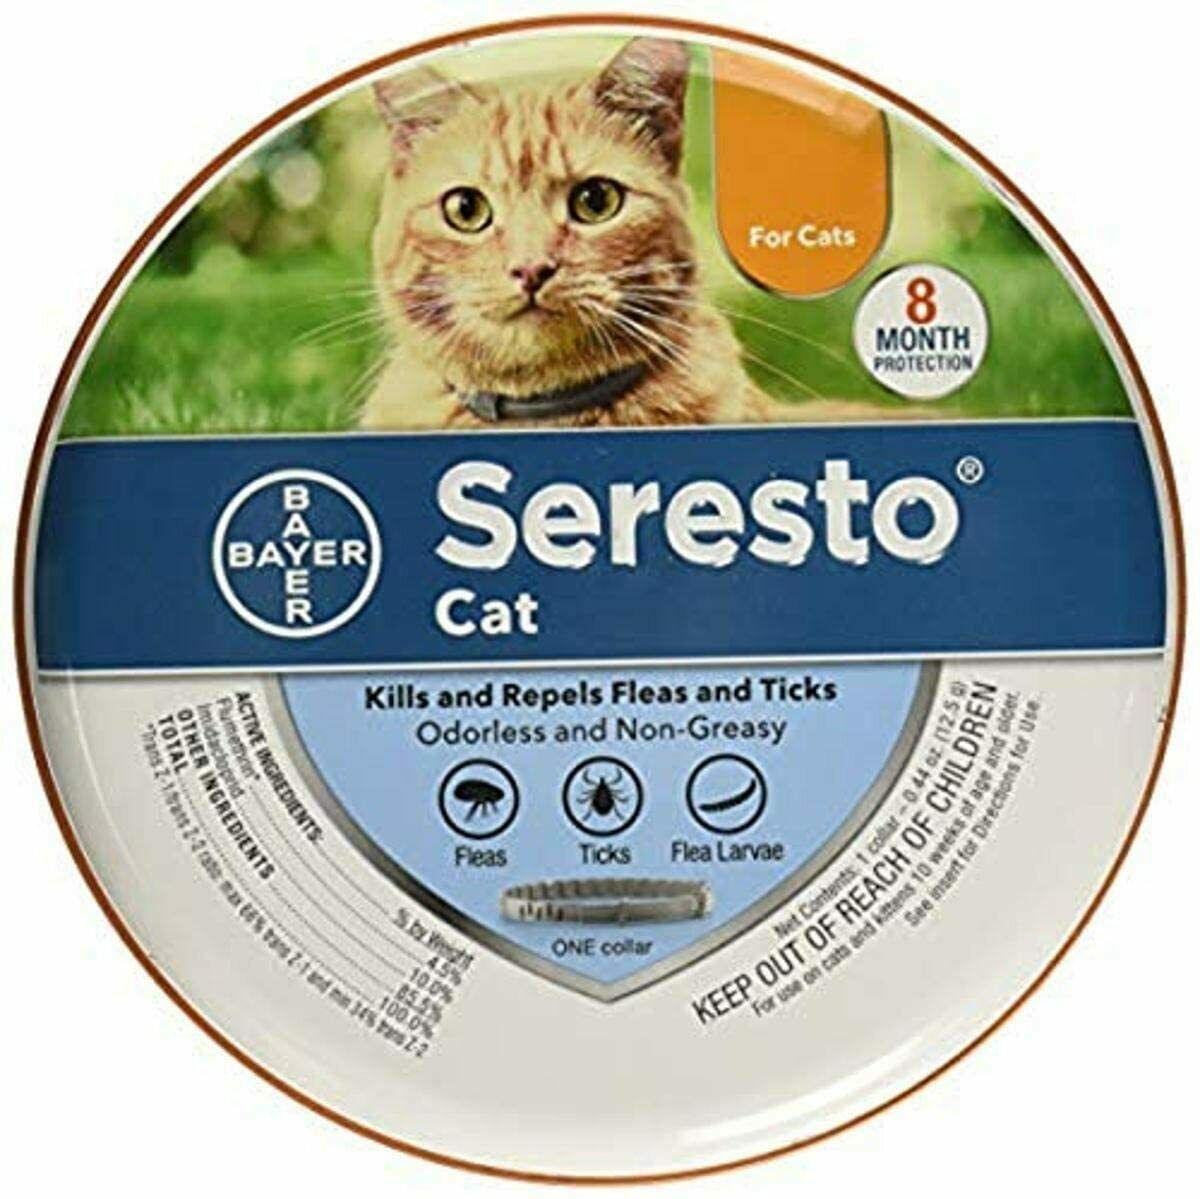 Seresto Flea & Tick Collar For Cats  7-8 Months Protection